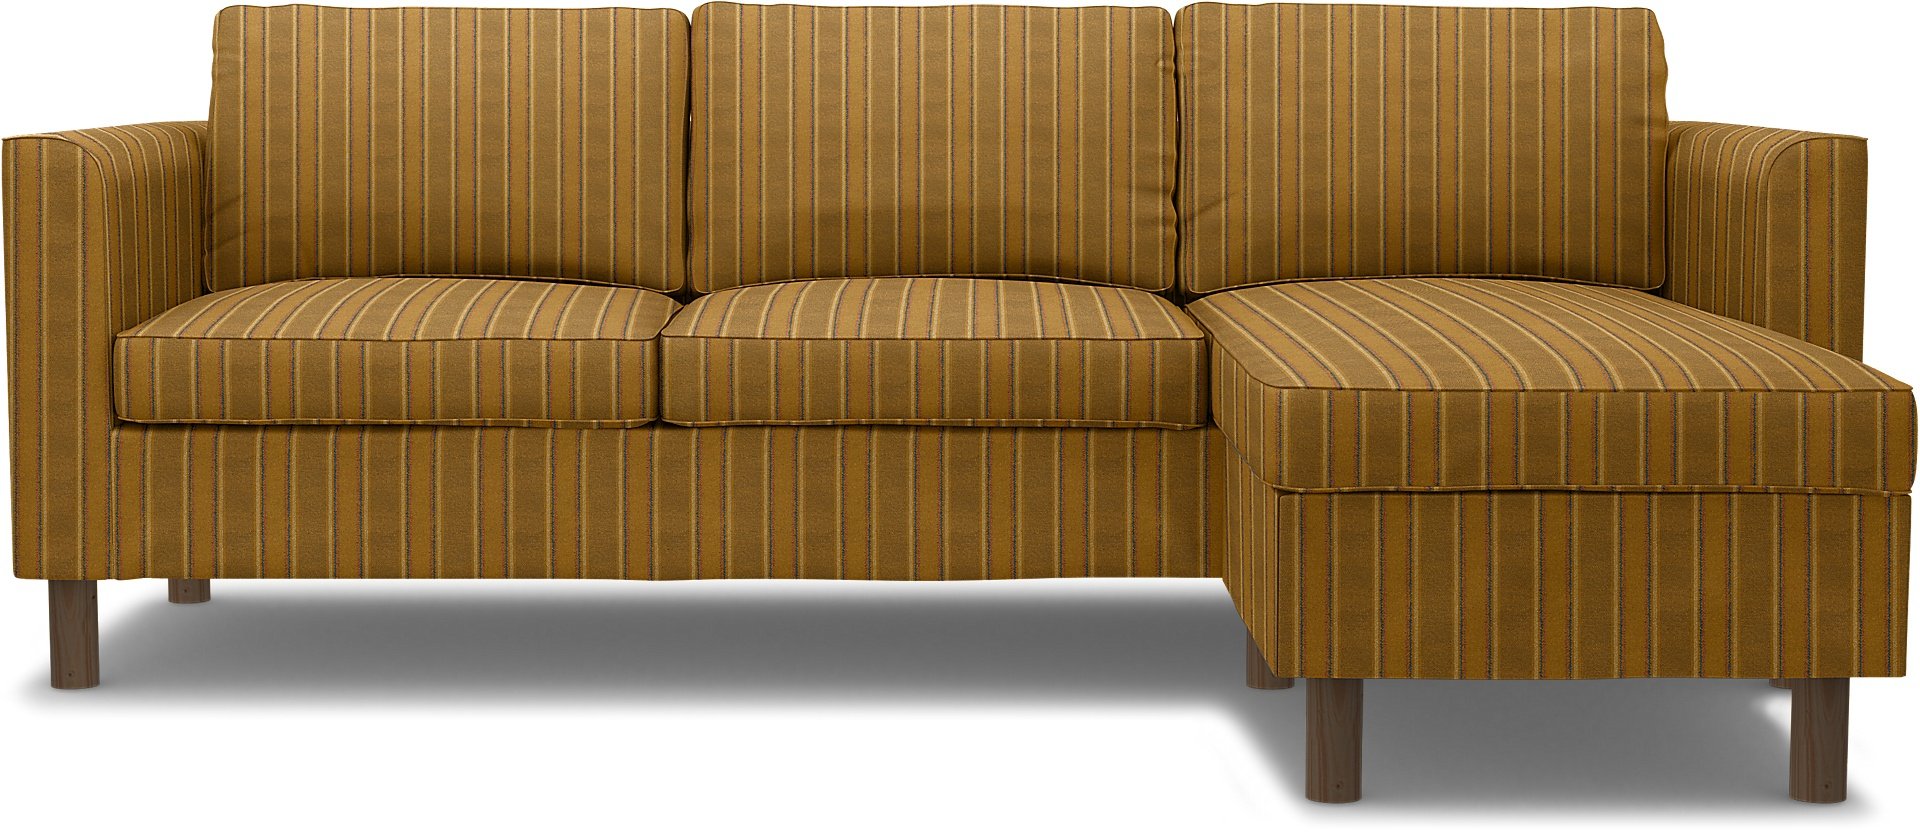 IKEA - Parup 3 Seater with chaise longue, Mustard Stripe, Moody Seventies Collection - Bemz